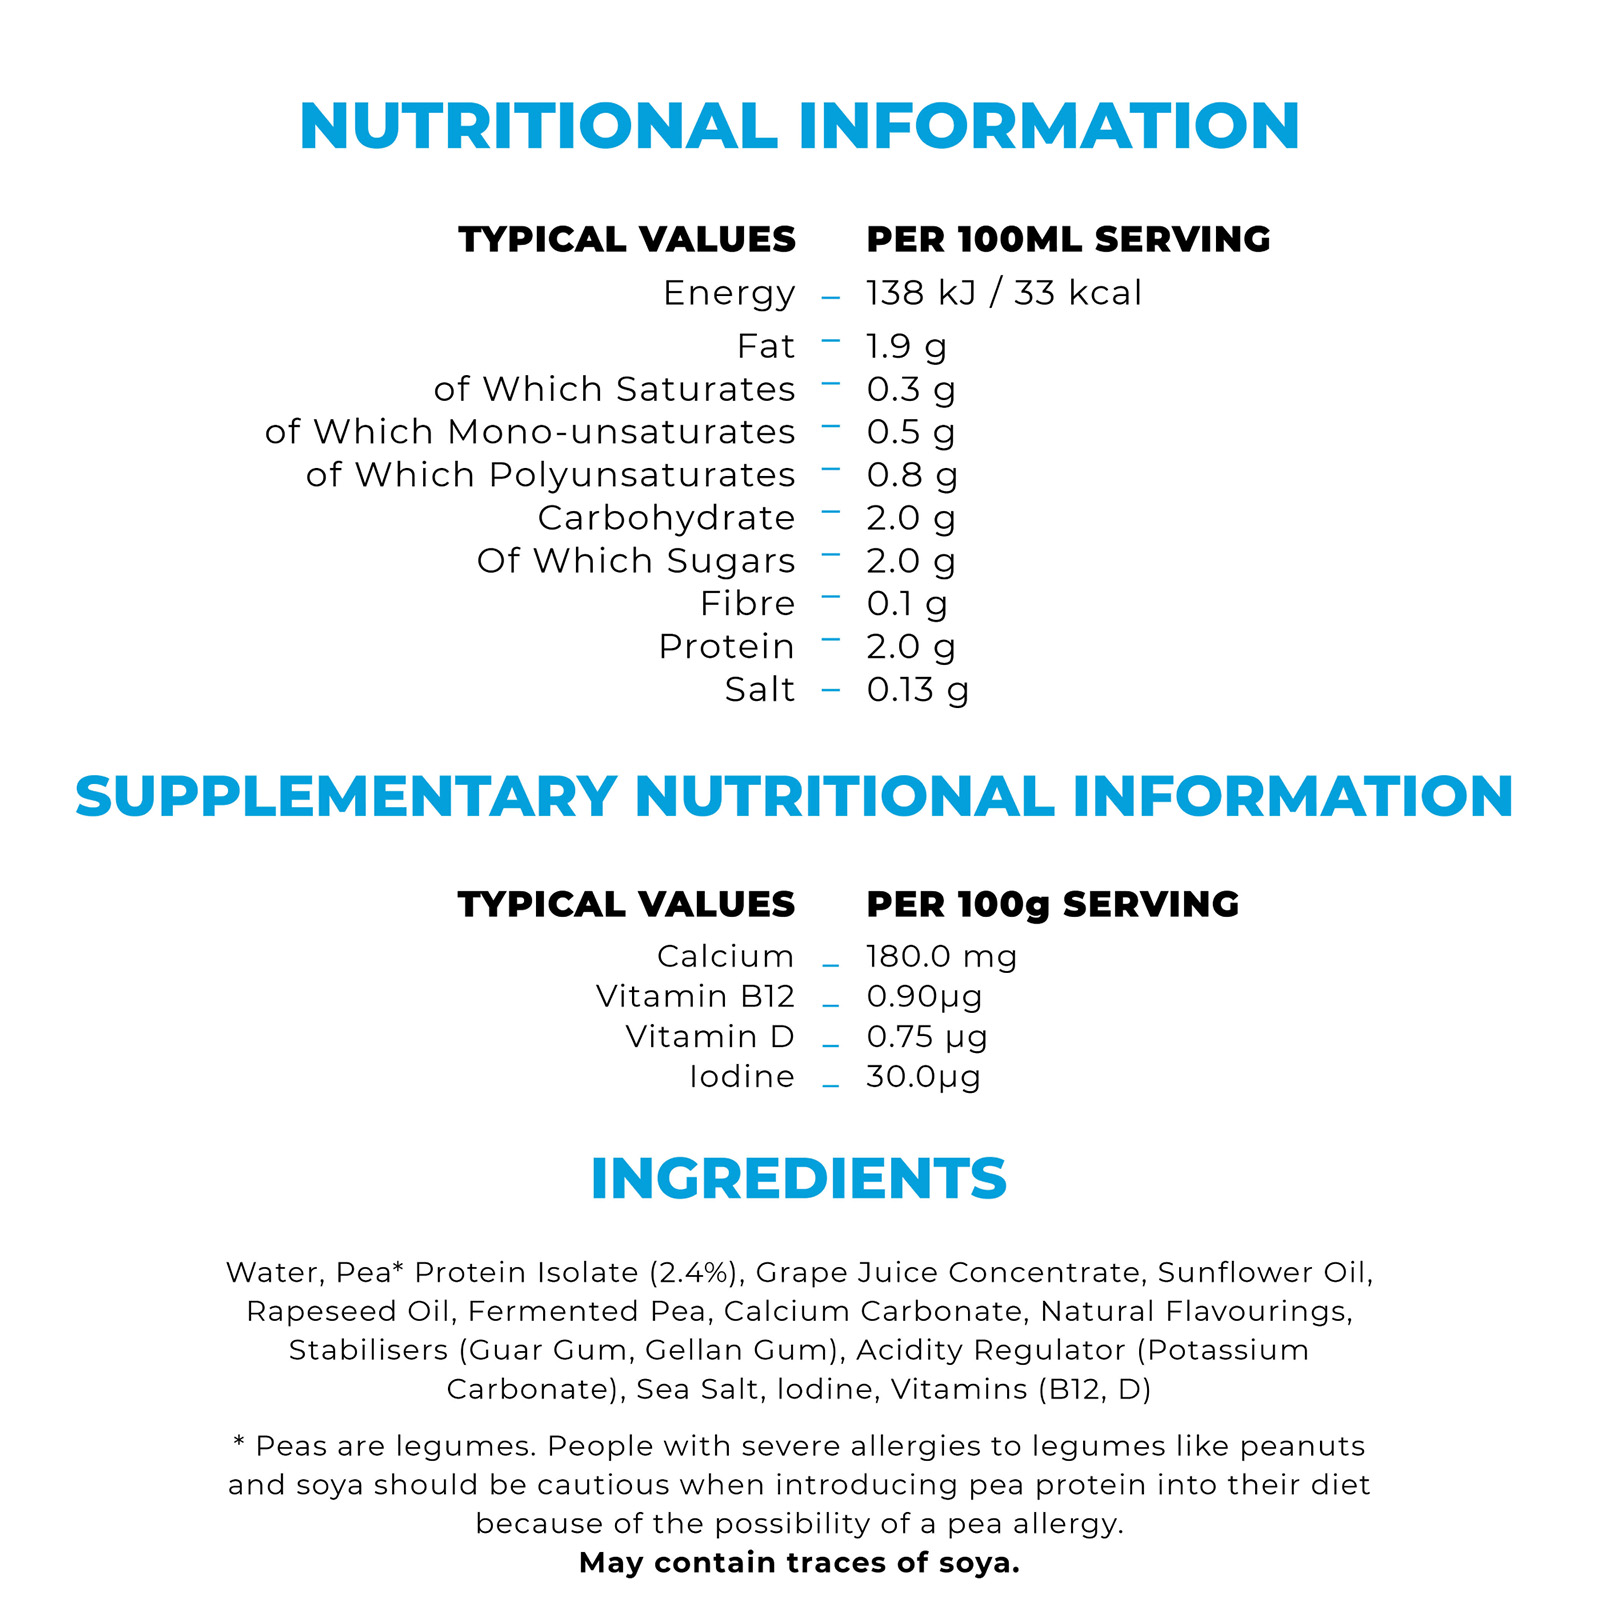 NUTRITIONAL INFORMATION
                                  TYPICAL VALUES
                                  Energy
                                  Fat
                                  of Which Saturates
                                  of Which Mono-unsaturates
                                  of Which Polyunsaturates
                                  Of Which Sugars
                                  Fibre
                                  Protein
                                  Salt
                                  -
                                  0.8 g
                                  Carbohydrate - 2.0 g
                                  2.0 g
                                  0.1 g
                                  2.0 g
                                  0.13 g
                                  -
                                  TYPICAL VALUES
                                  Calcium
                                  PER 100ML SERVING
                                  138 kJ/33 kcal
                                  -
                                  1.9 g
                                  0.3 g
                                  0.5 g
                                  SUPPLEMENTARY NUTRITIONAL INFORMATION
                                  PER 100g SERVING180.0 mg
                                  Vitamin B12
                                  0.90μg
                                  Vitamin D - 0.75 µg
                                  lodine
                                  30.0ug
                                  INGREDIENTS
                                  Water, Pea* Protein Isolate (2.4%), Grape Juice Concentrate, Sunflower Oil,
                                  Rapeseed Oil, Fermented Pea, Calcium Carbonate, Natural Flavourings,
                                  Stabilisers (Guar Gum, Gellan Gum), Acidity Regulator (Potassium
                                  Carbonate), Sea Salt, lodine, Vitamins (B12, D)
                                  Peas are legumes. People with severe allergies to legumes like peanuts
                                  and soya should be cautious when introducing pea protein into their diet
                                  because of the possibility of a pea allergy.
                                  May contain traces of soya.
                                  